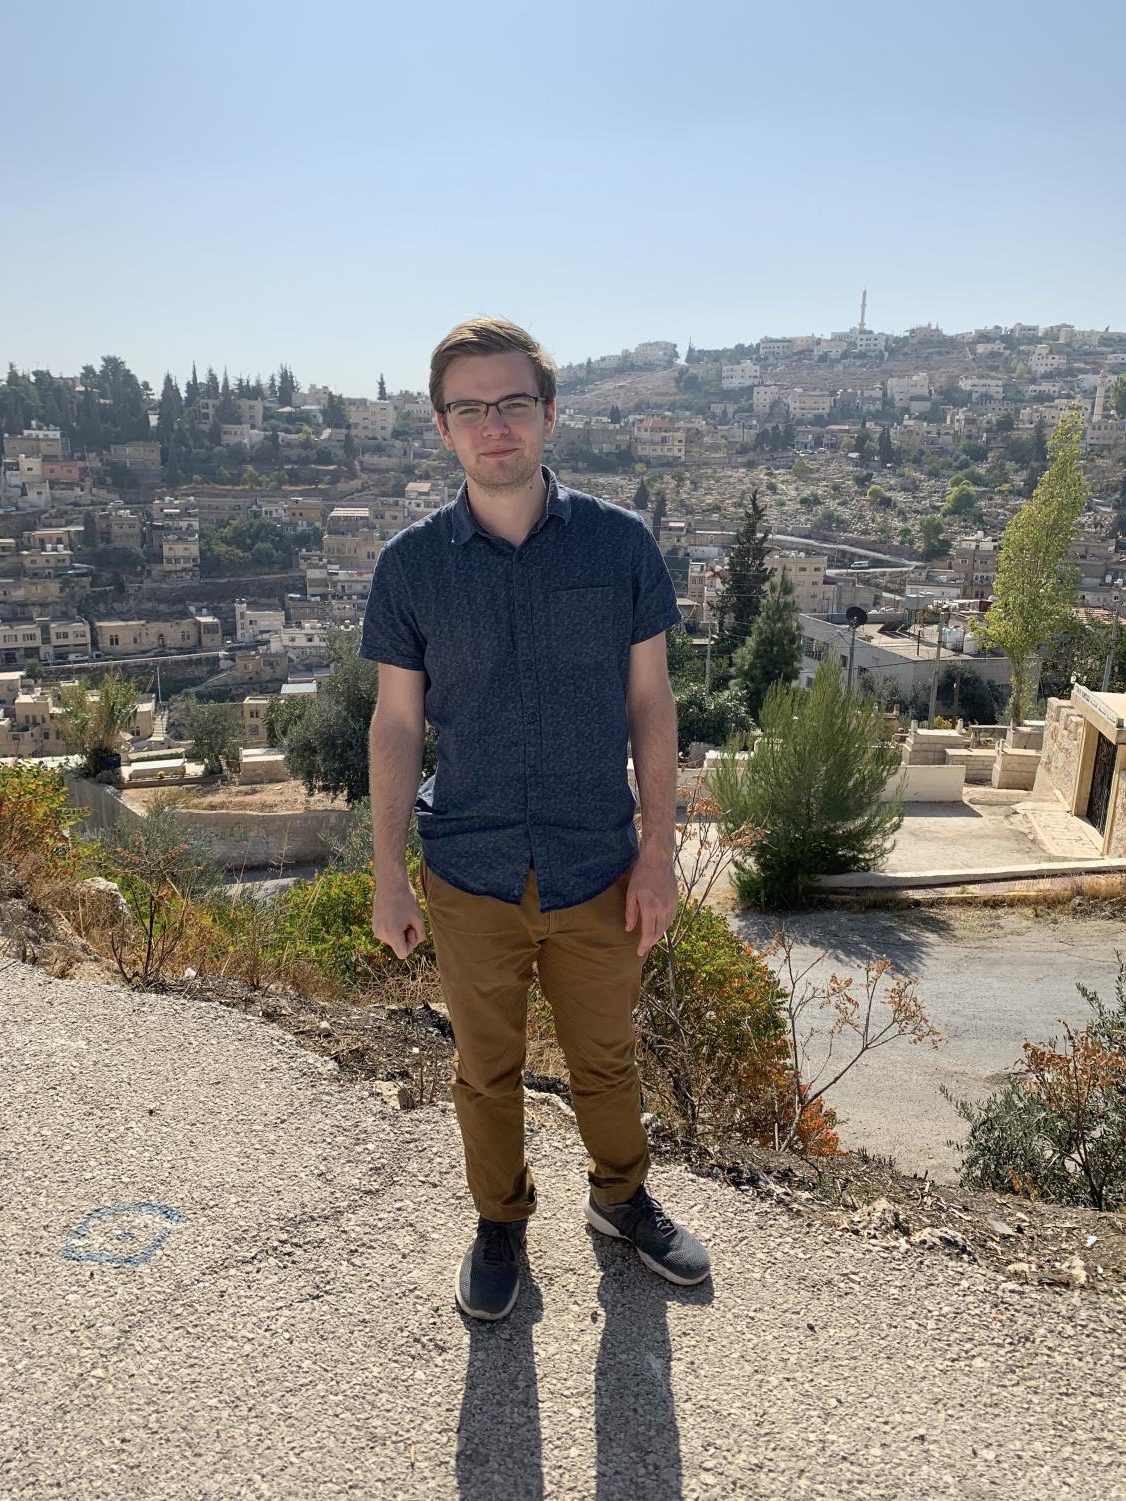 Gregory Hopp FCRH '21 is doing Research while studying abroad in Jordan